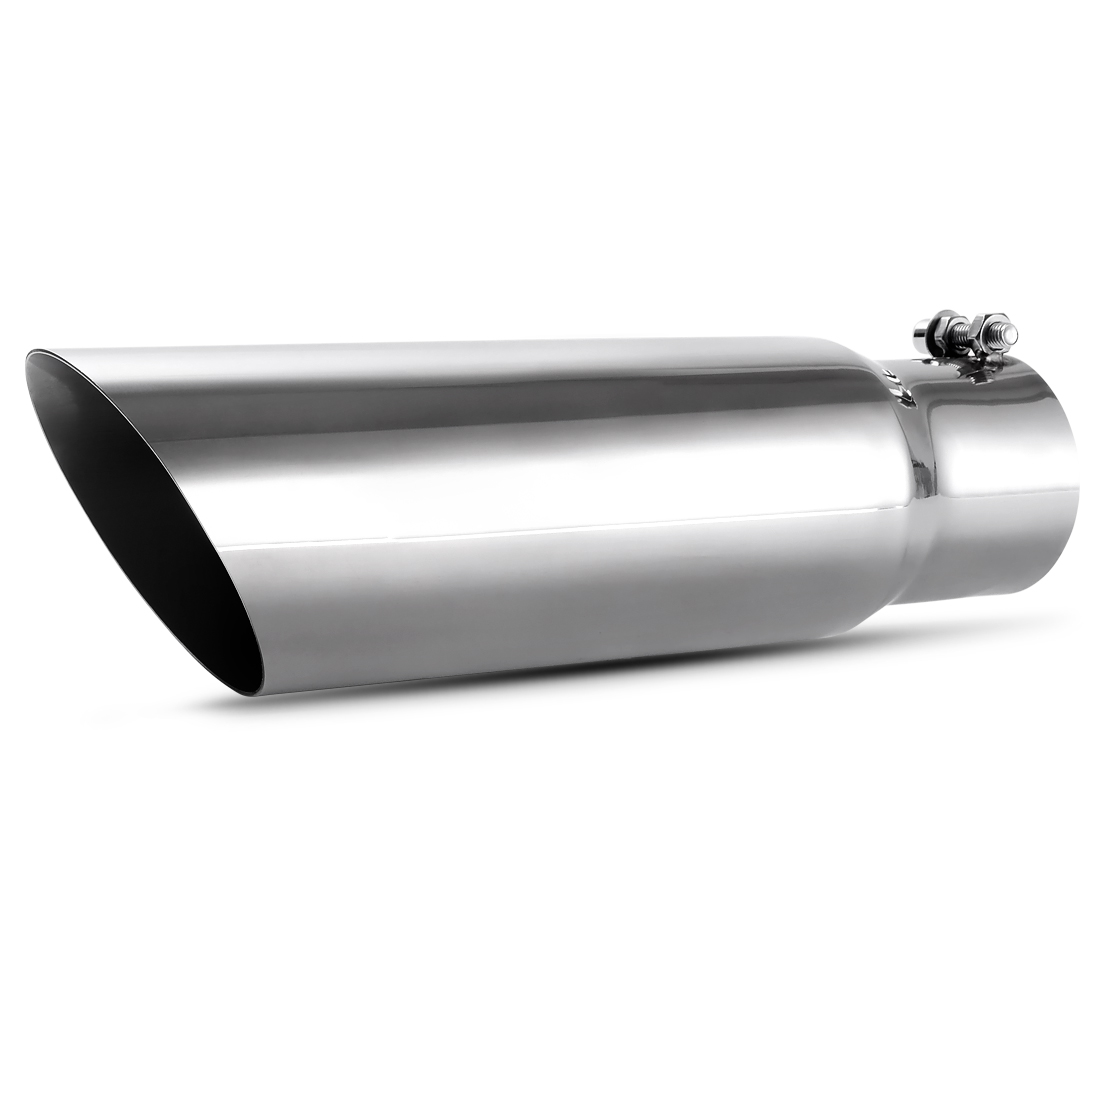 Apeixoto 2.75 Inch Inlet Exhaust Tip 2.75 Inches Inlet 3.5 Inches Outlet 12 Inches Long Polished Stainless Steel Exhaust Tailpipe Tip Bolt On Design 